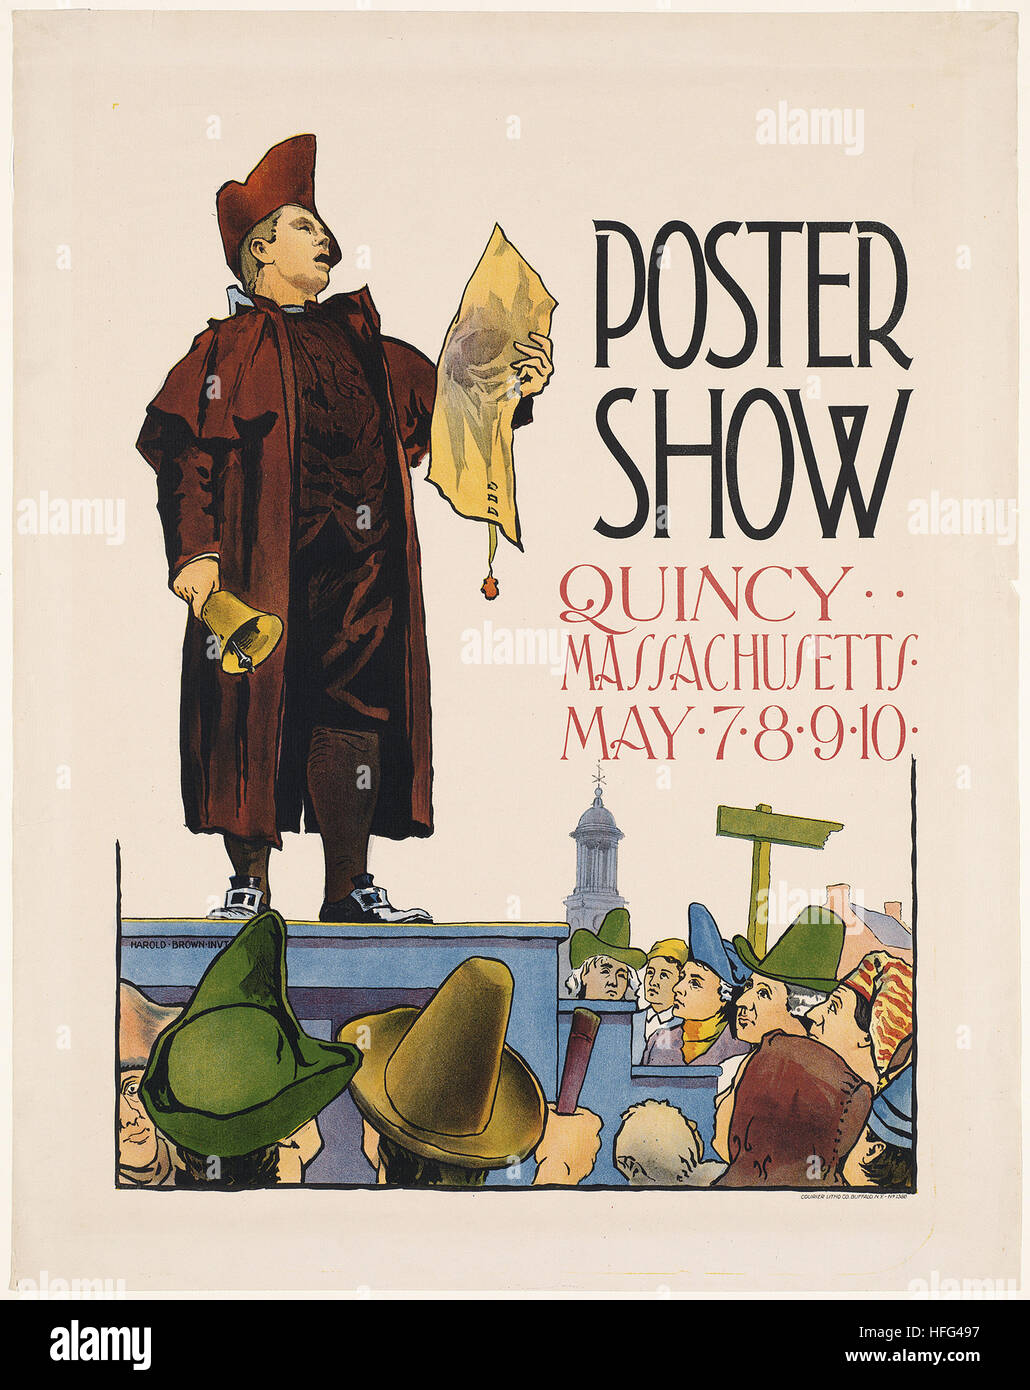 Poster show, Quincy Massachusetts, May 7, 8, 9, 10 Stock Photo